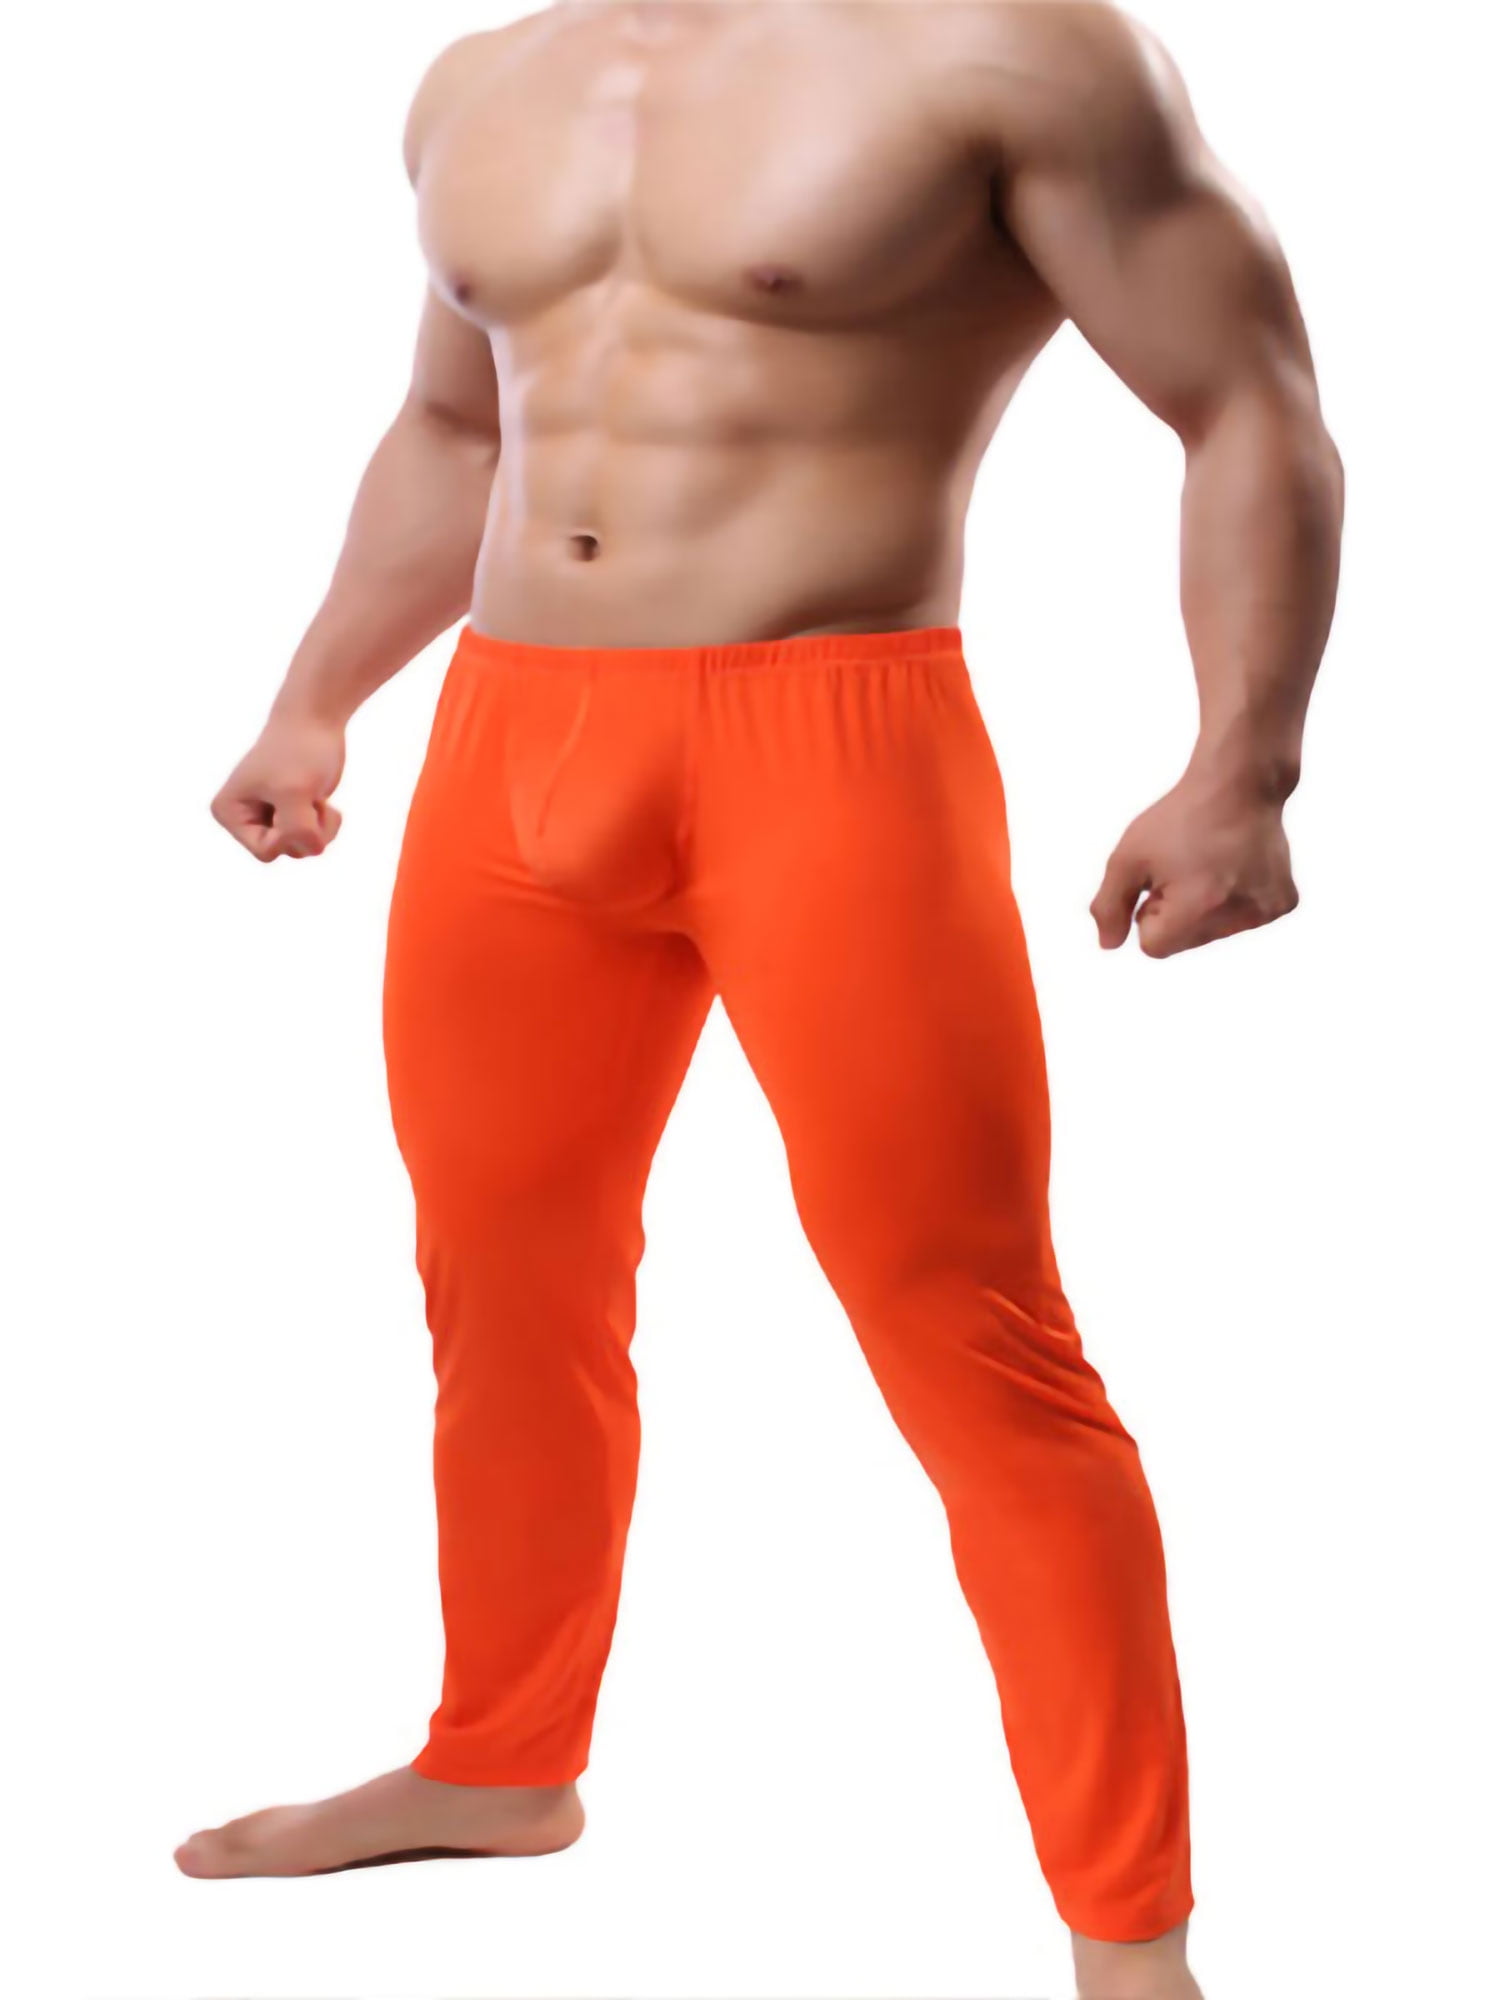 Mens Long Johns Bulge Pouch Underwear Thermal Pants Basic See Through Trousers 